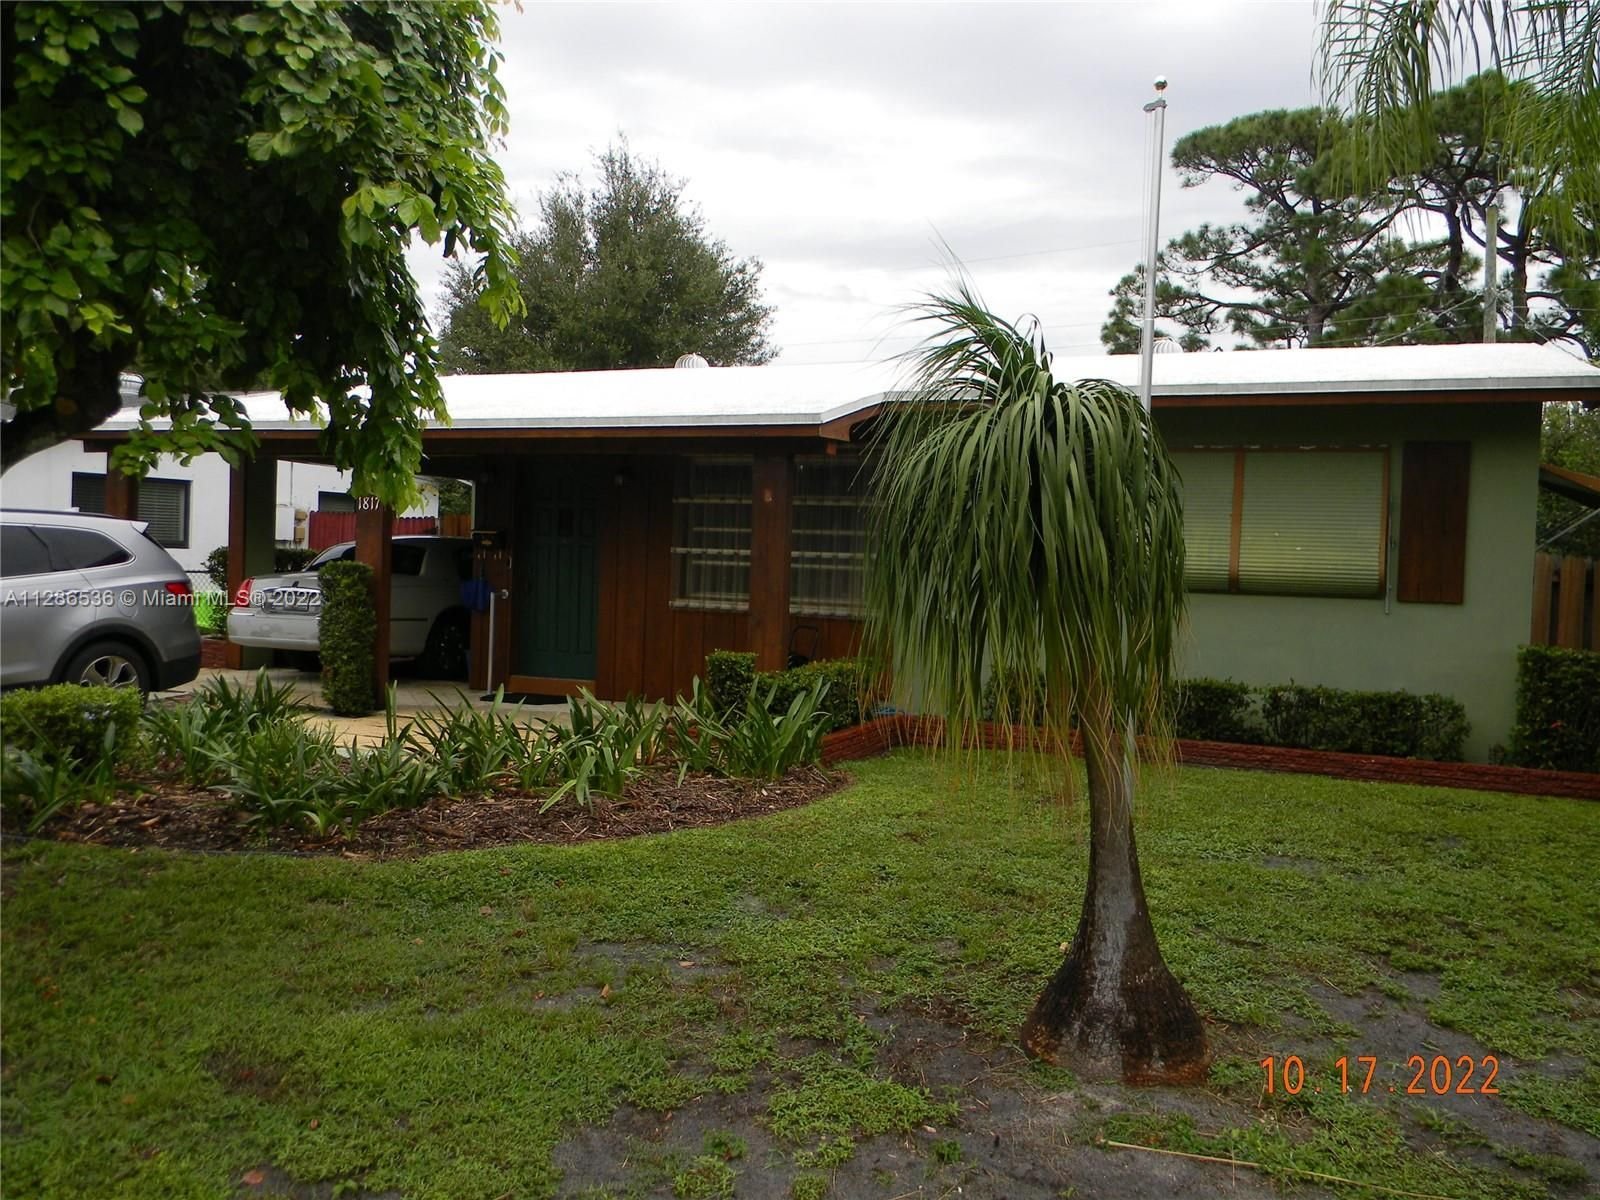 Real estate property located at 1817 11th St, Broward County, Fort Lauderdale, FL